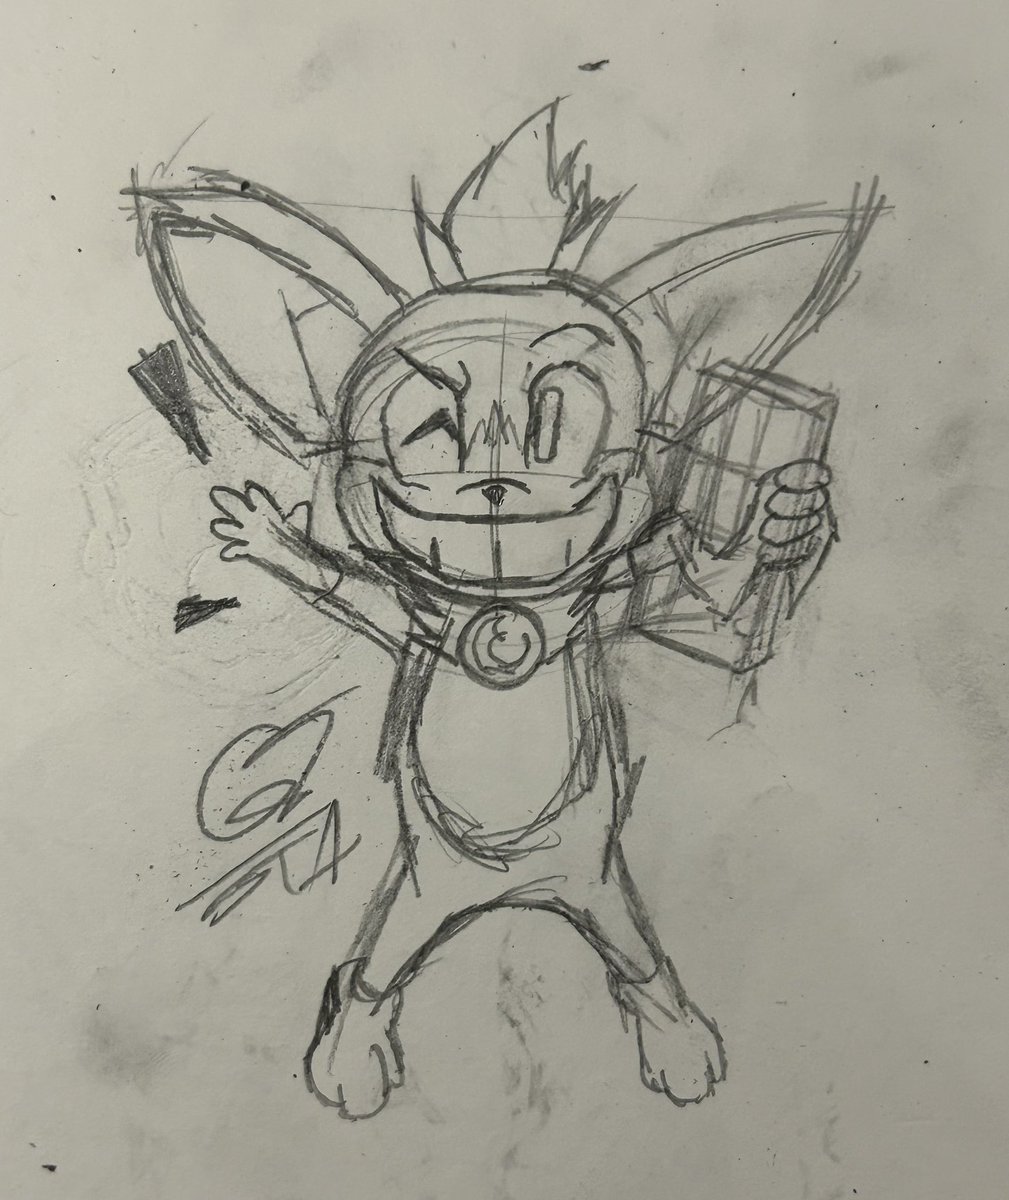 CHIP, I'm just 'practicing'!

#SonicUnleashed #Chip #sketch 
#SonicTheHedgehog